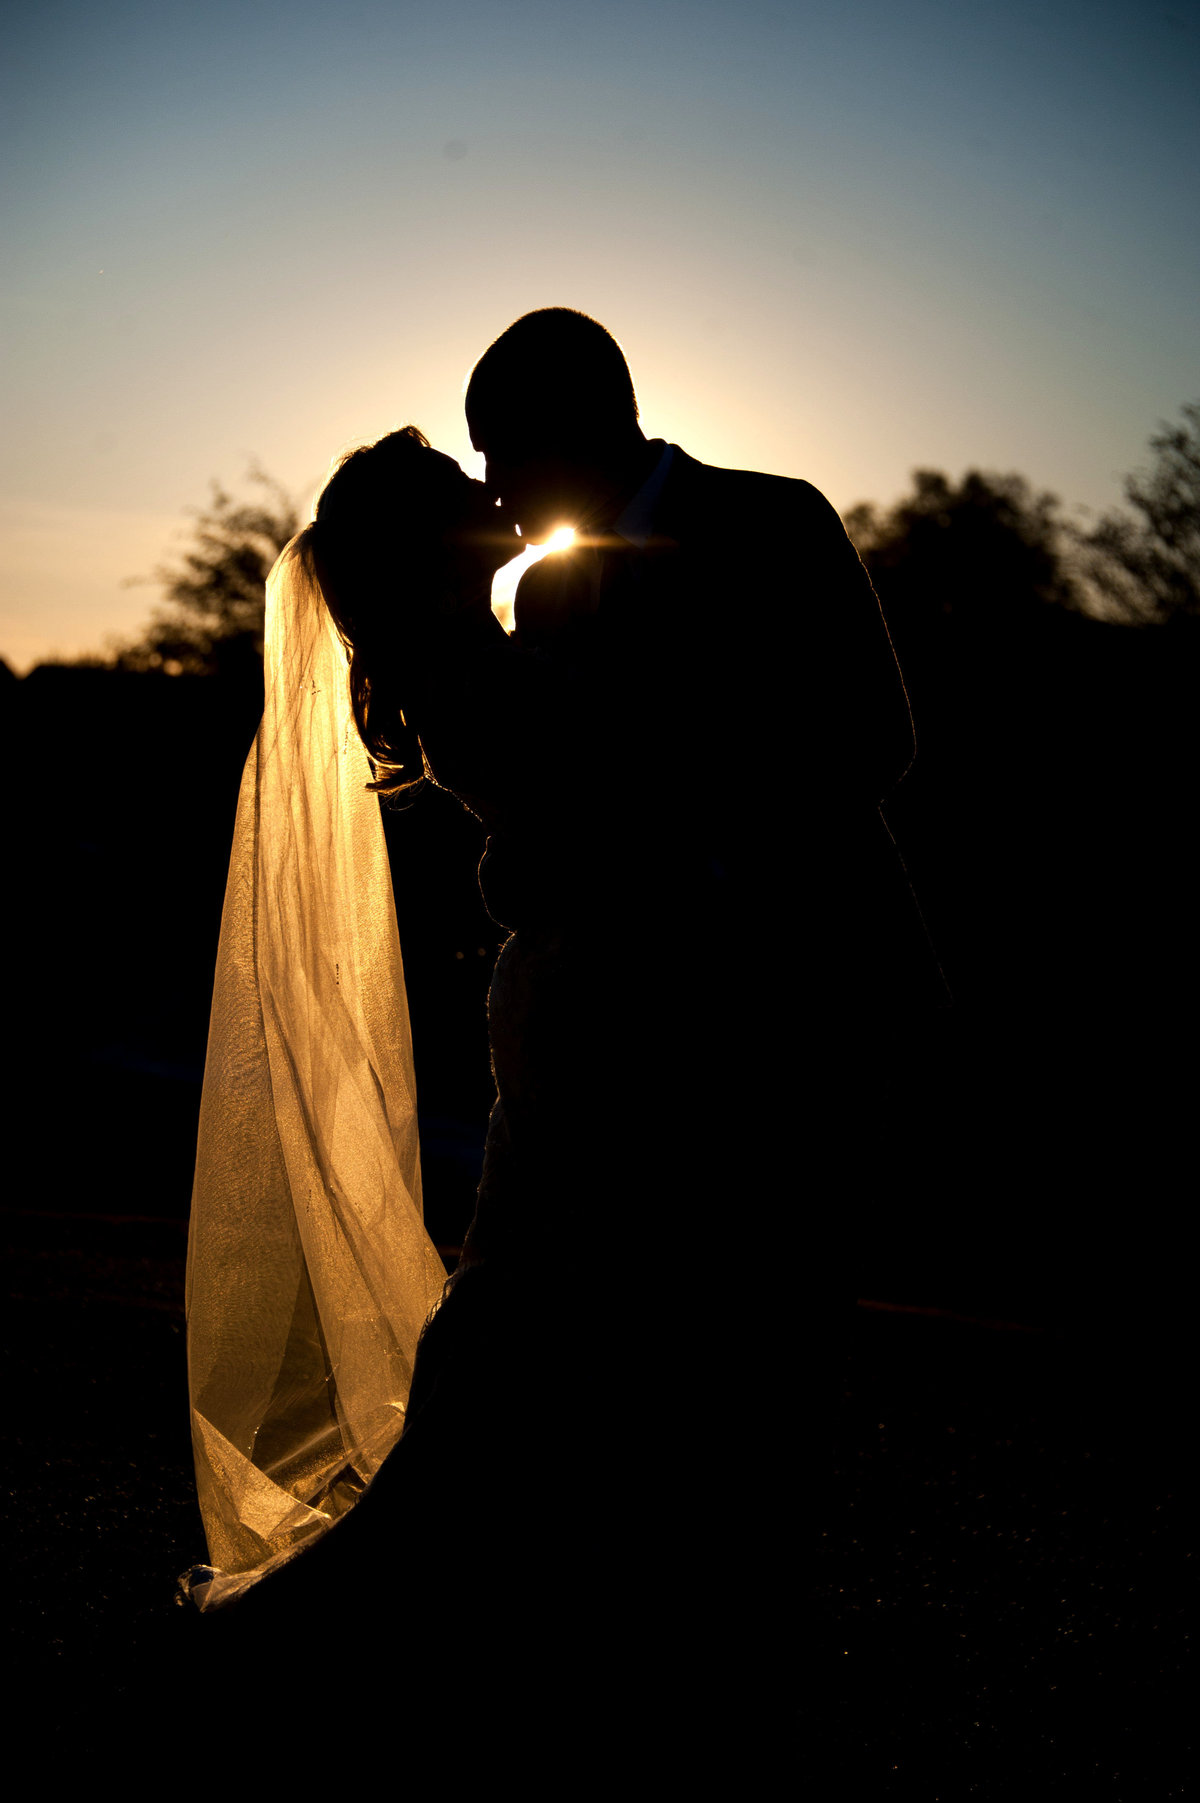 Outdoor sunset wedding photo for the Romantic Couple. Outdoor photographer for the fun sweethearts. Romantic Wedding Photo.